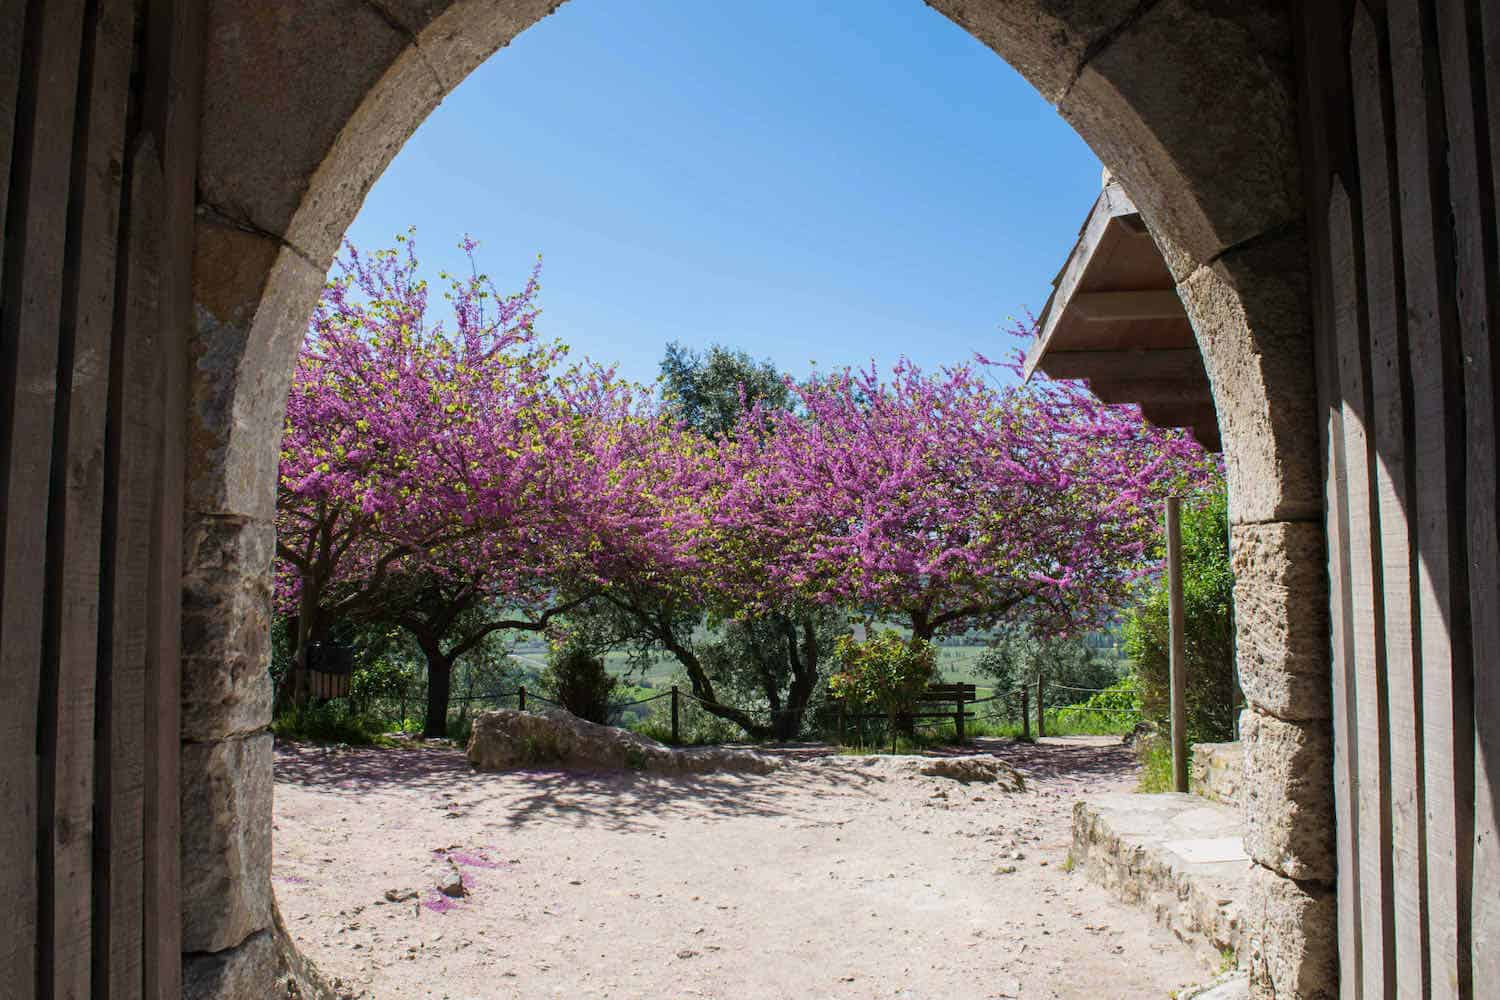 Pink blooming trees as seen through a stone archway in Obidos Portugal